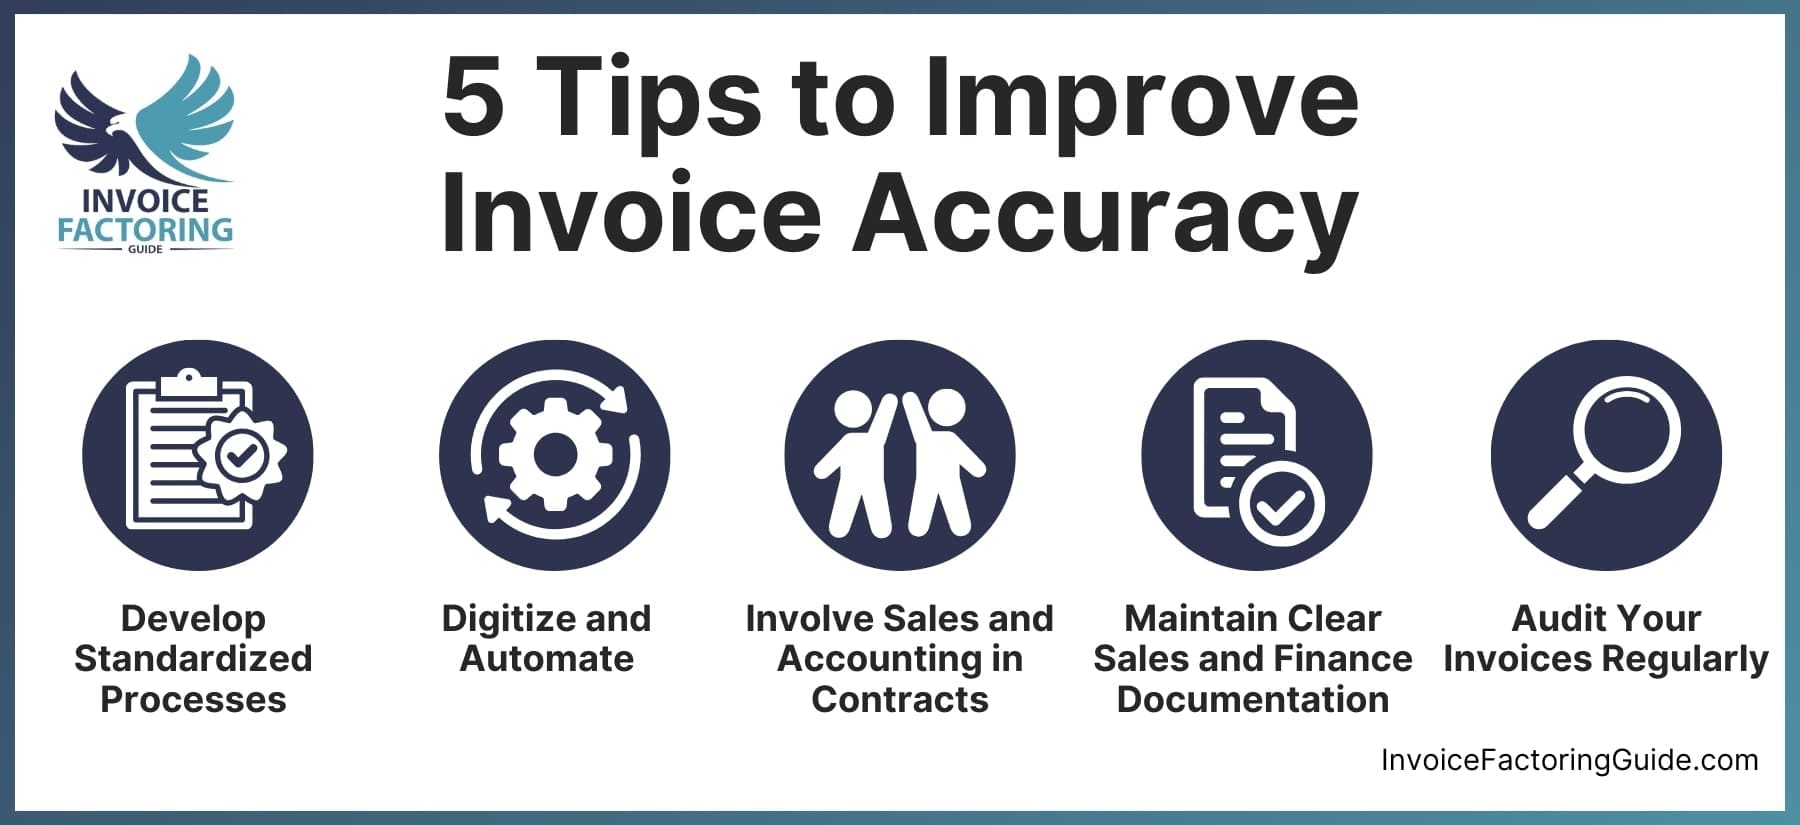 Tips to Improve Invoice Accuracy